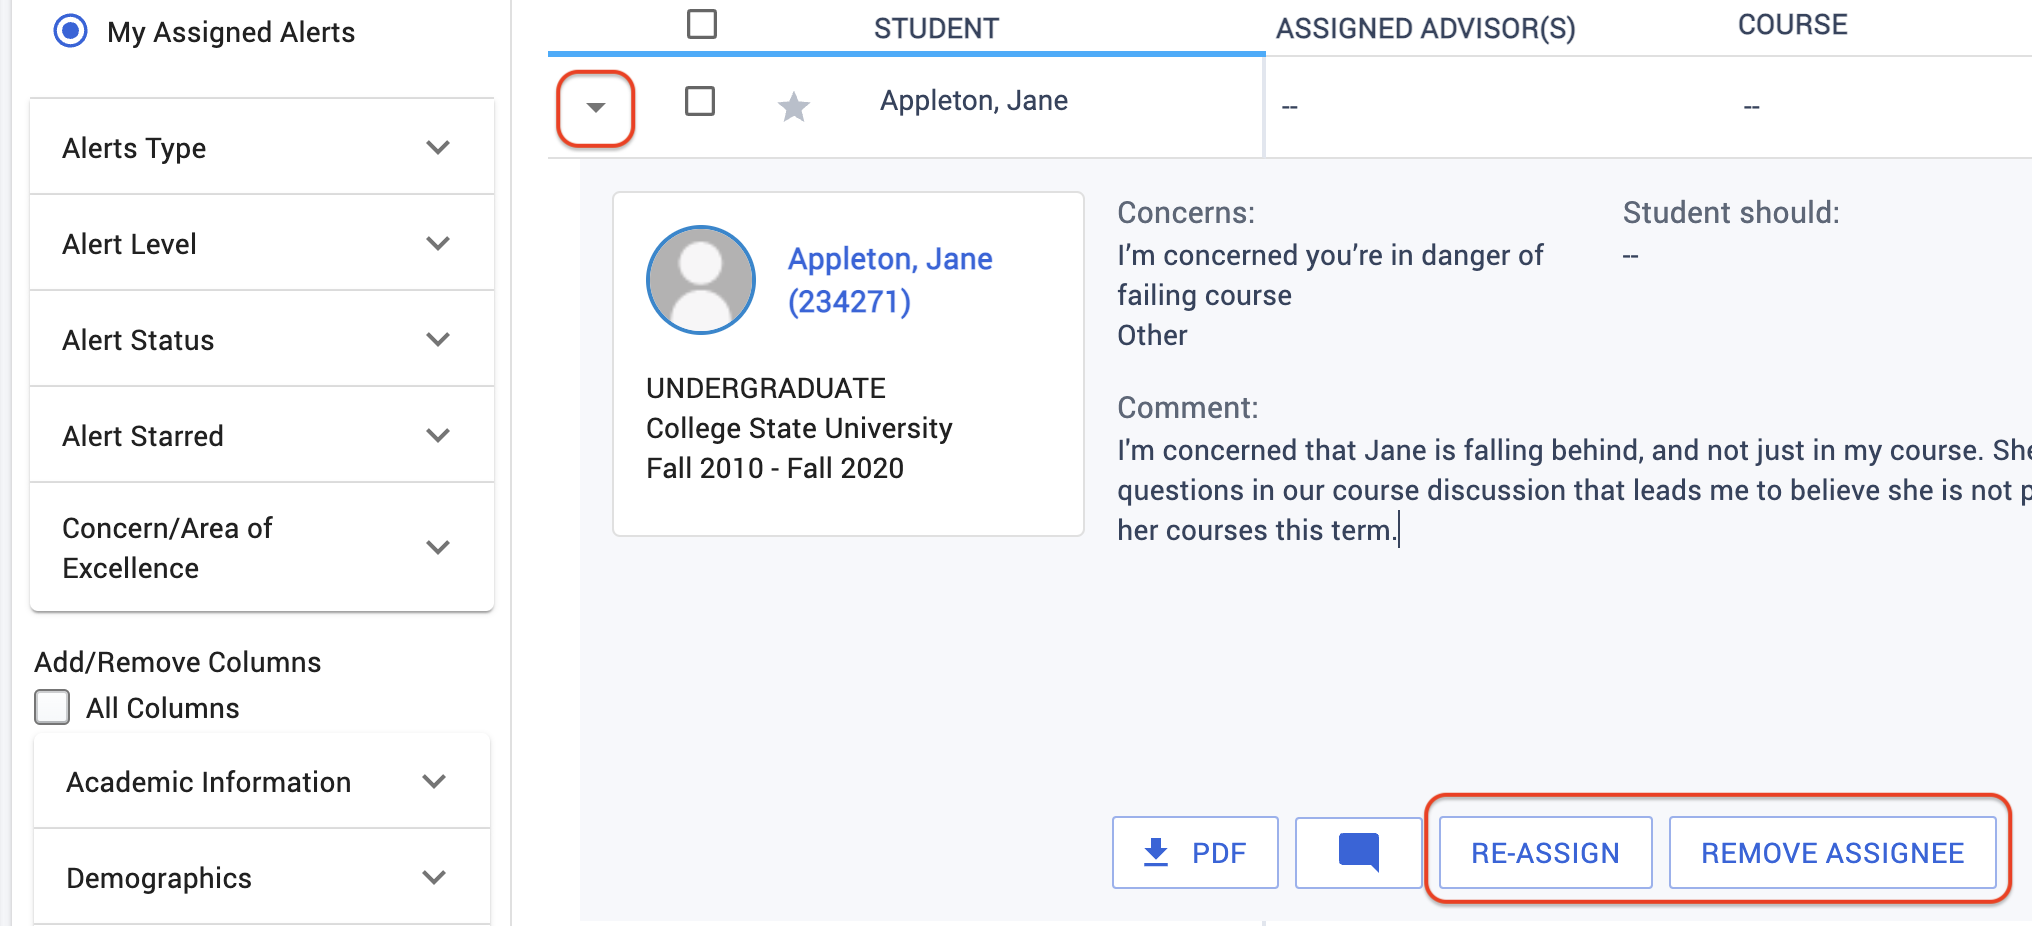 Expand the alert to access the buttons to re-assign or remove the assignee from the alert